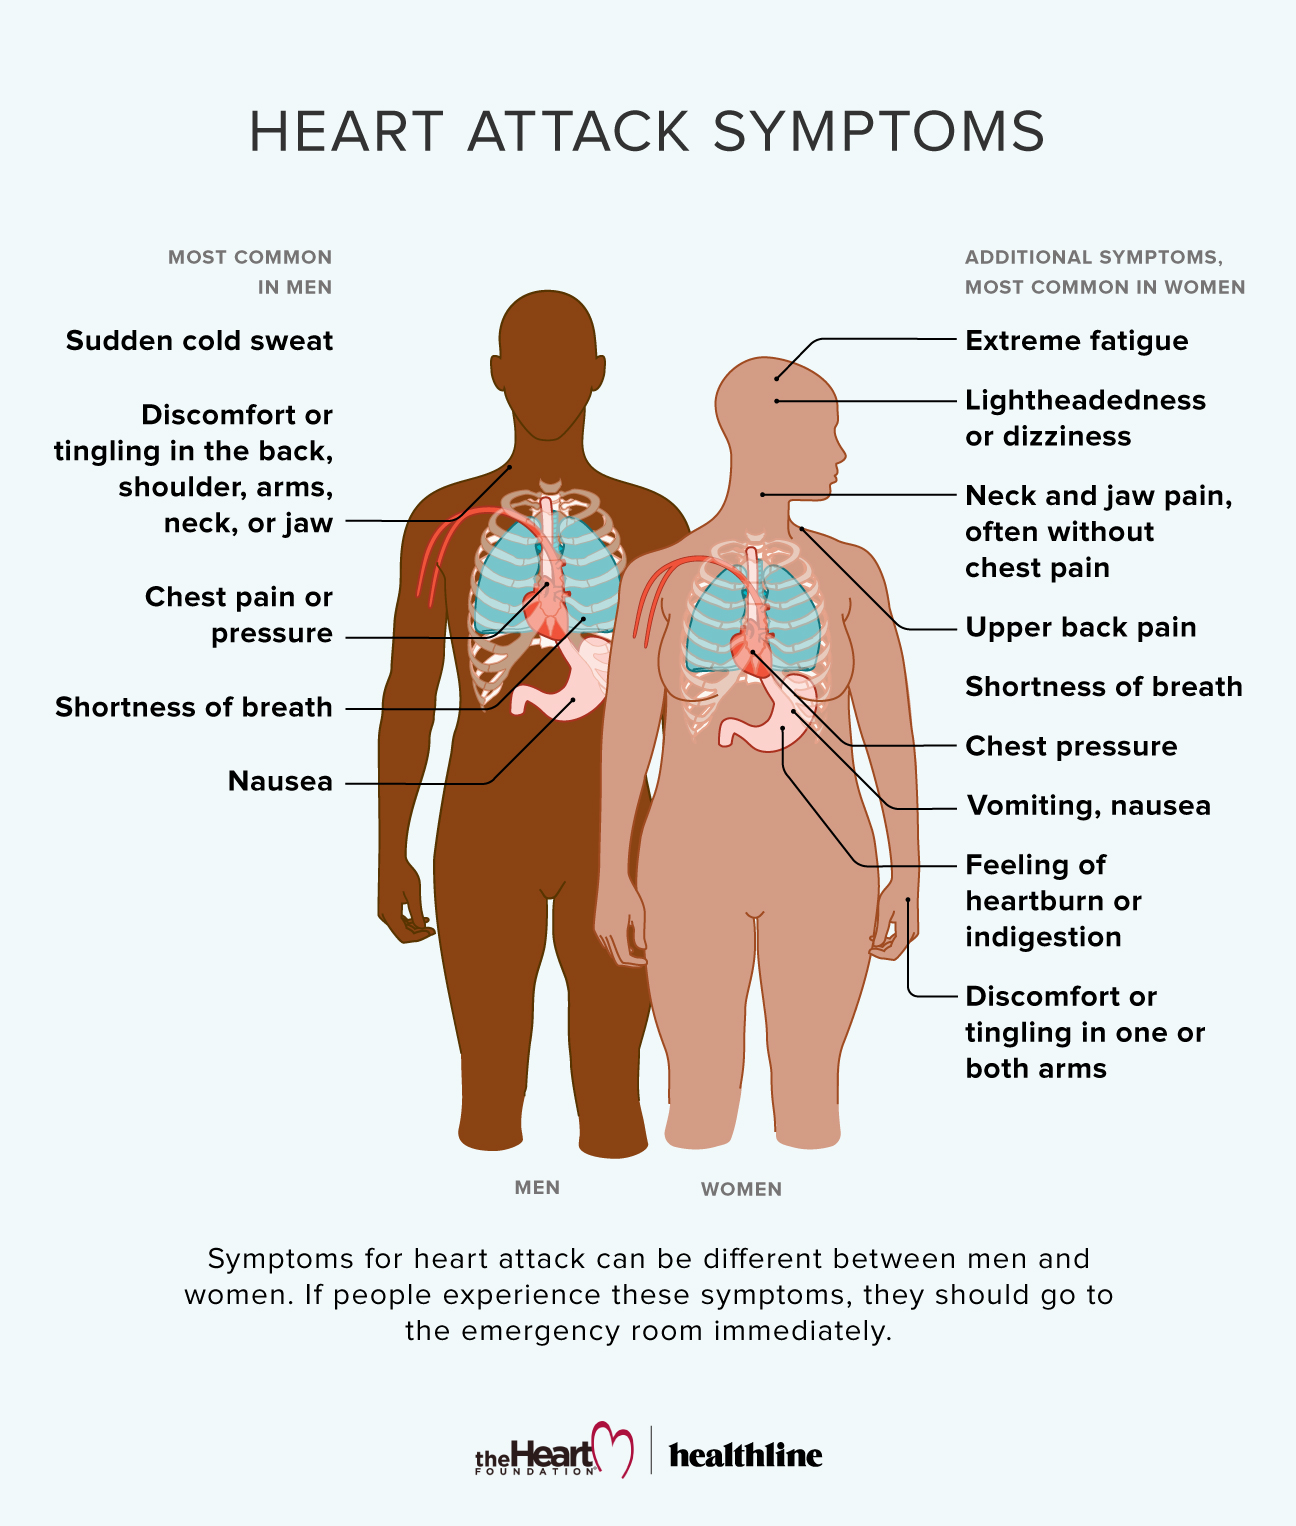 Signs and Symptoms of Heart Attack in Women